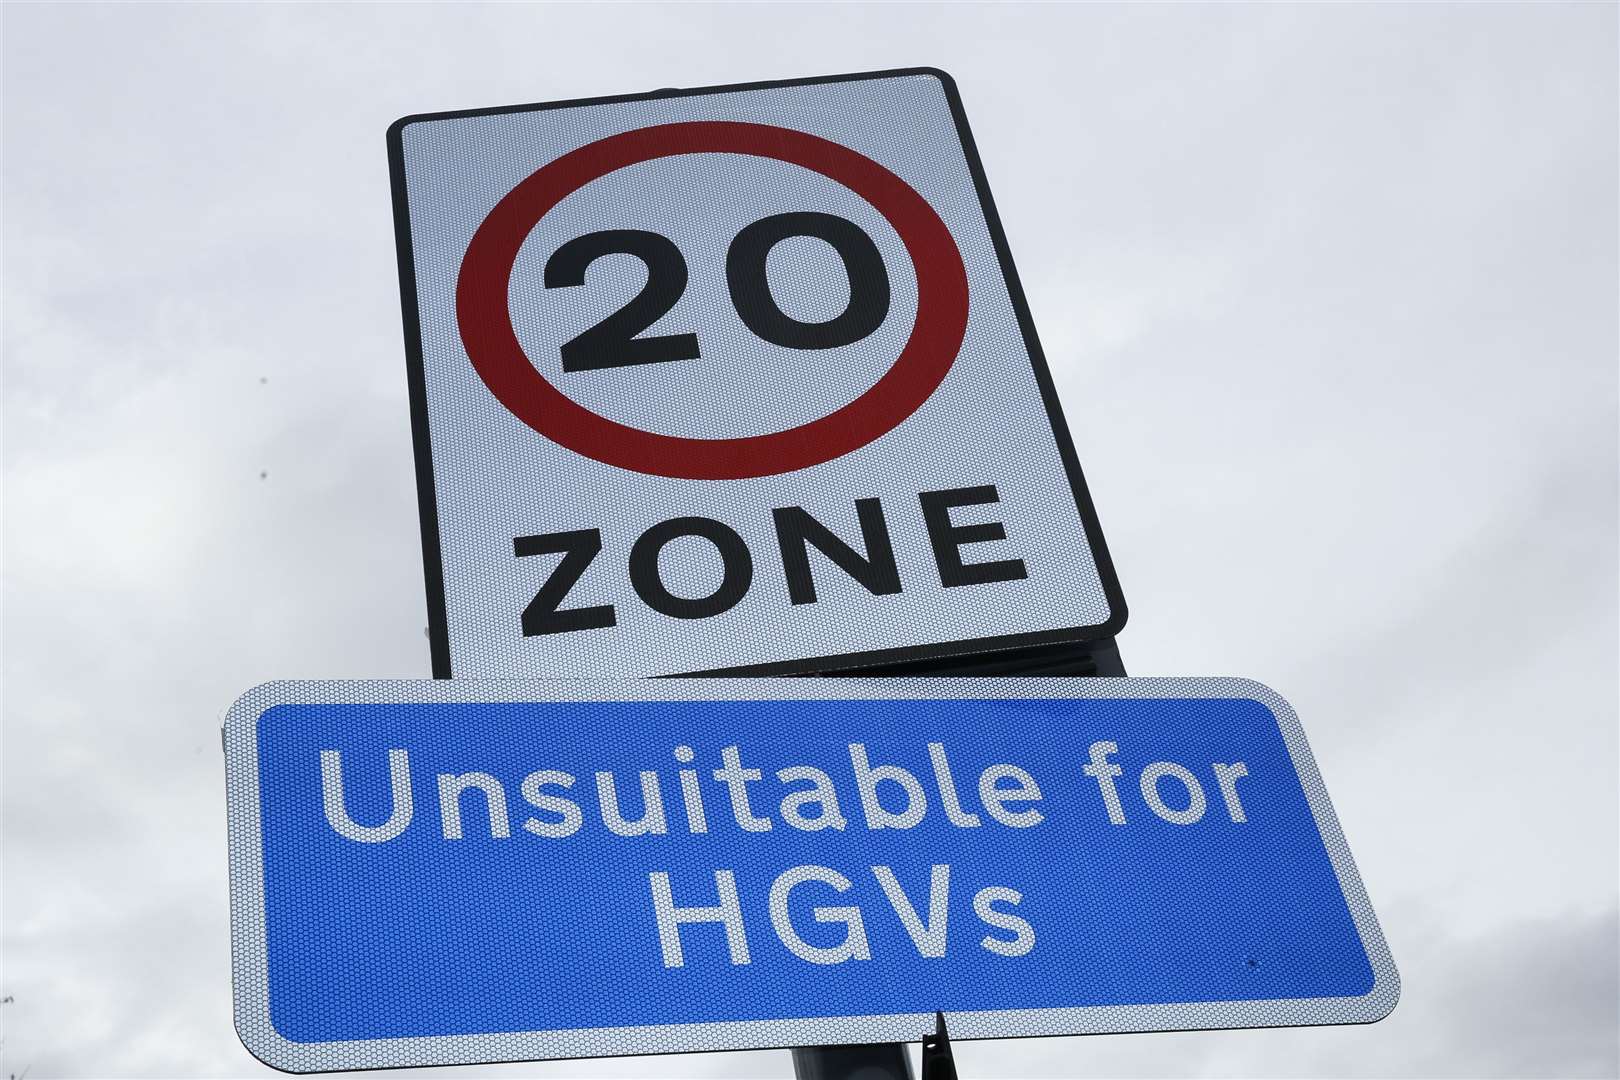 The town centre could become a 20mph zone